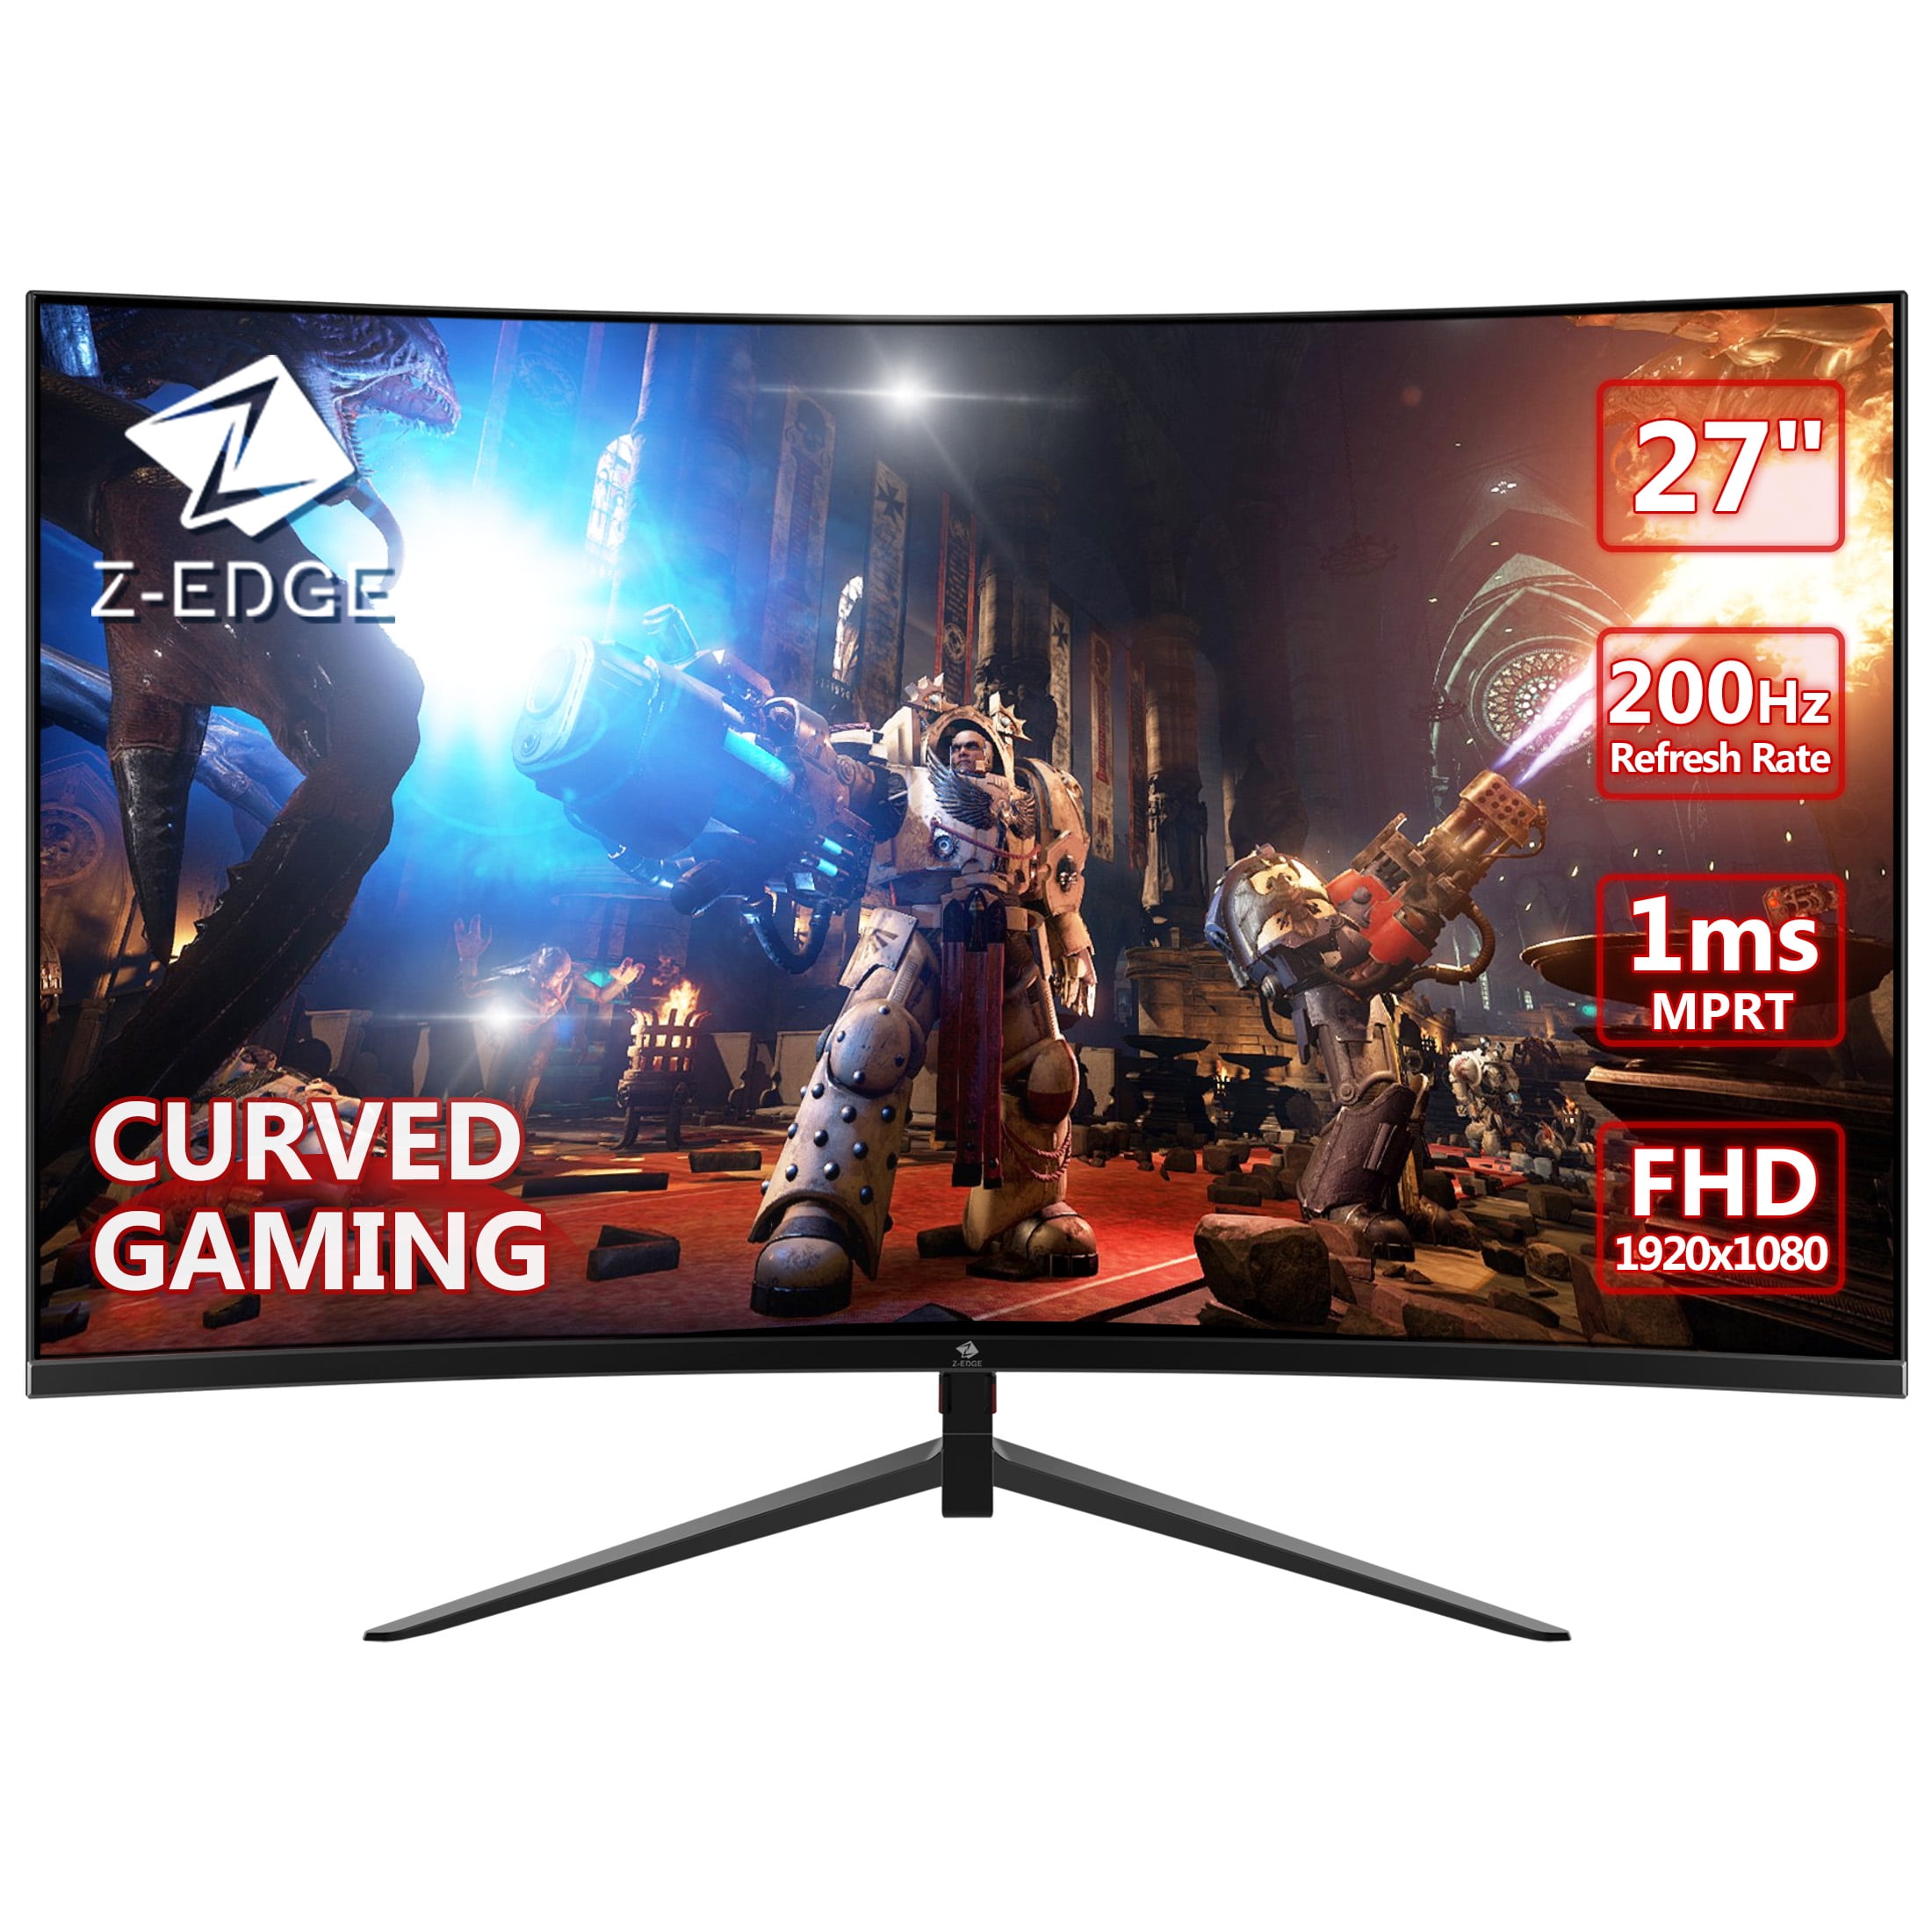 Z-EDGE UG27 27-Inch LED Curved Gaming Monitor 200Hz(DP) 144Hz(HDMI